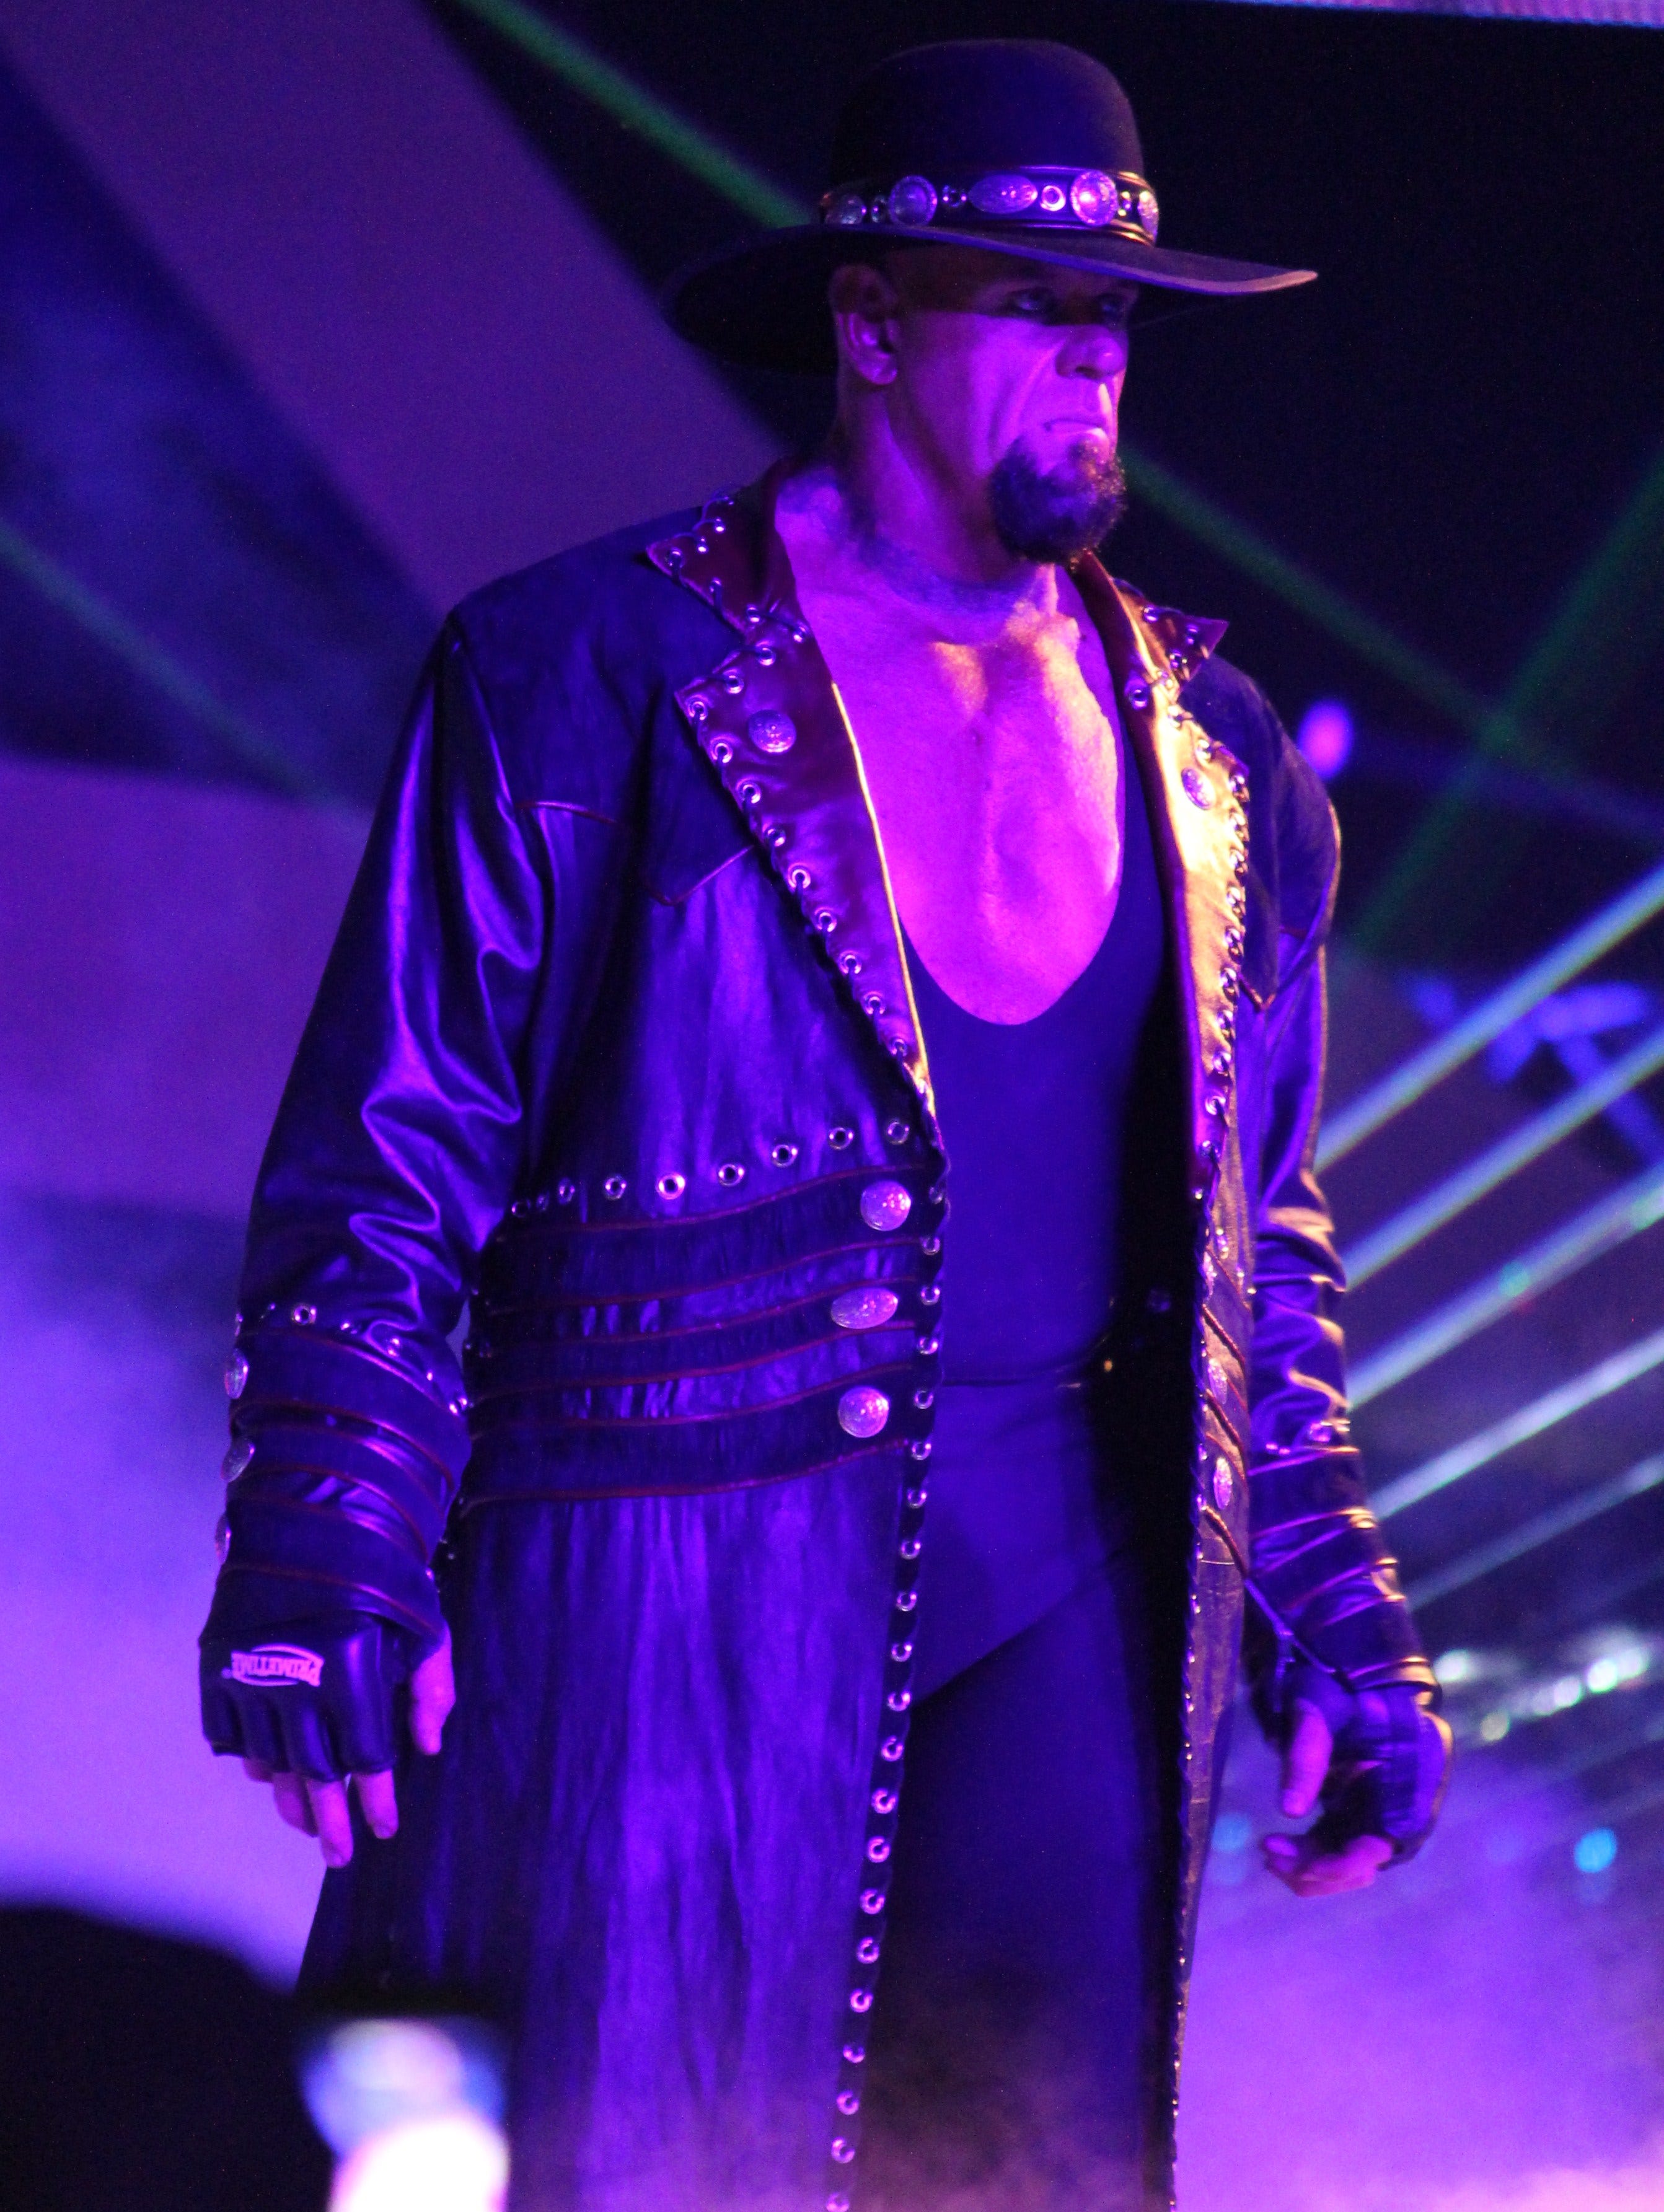 The Undertaker on why his character wouldn't work In WWE's Current